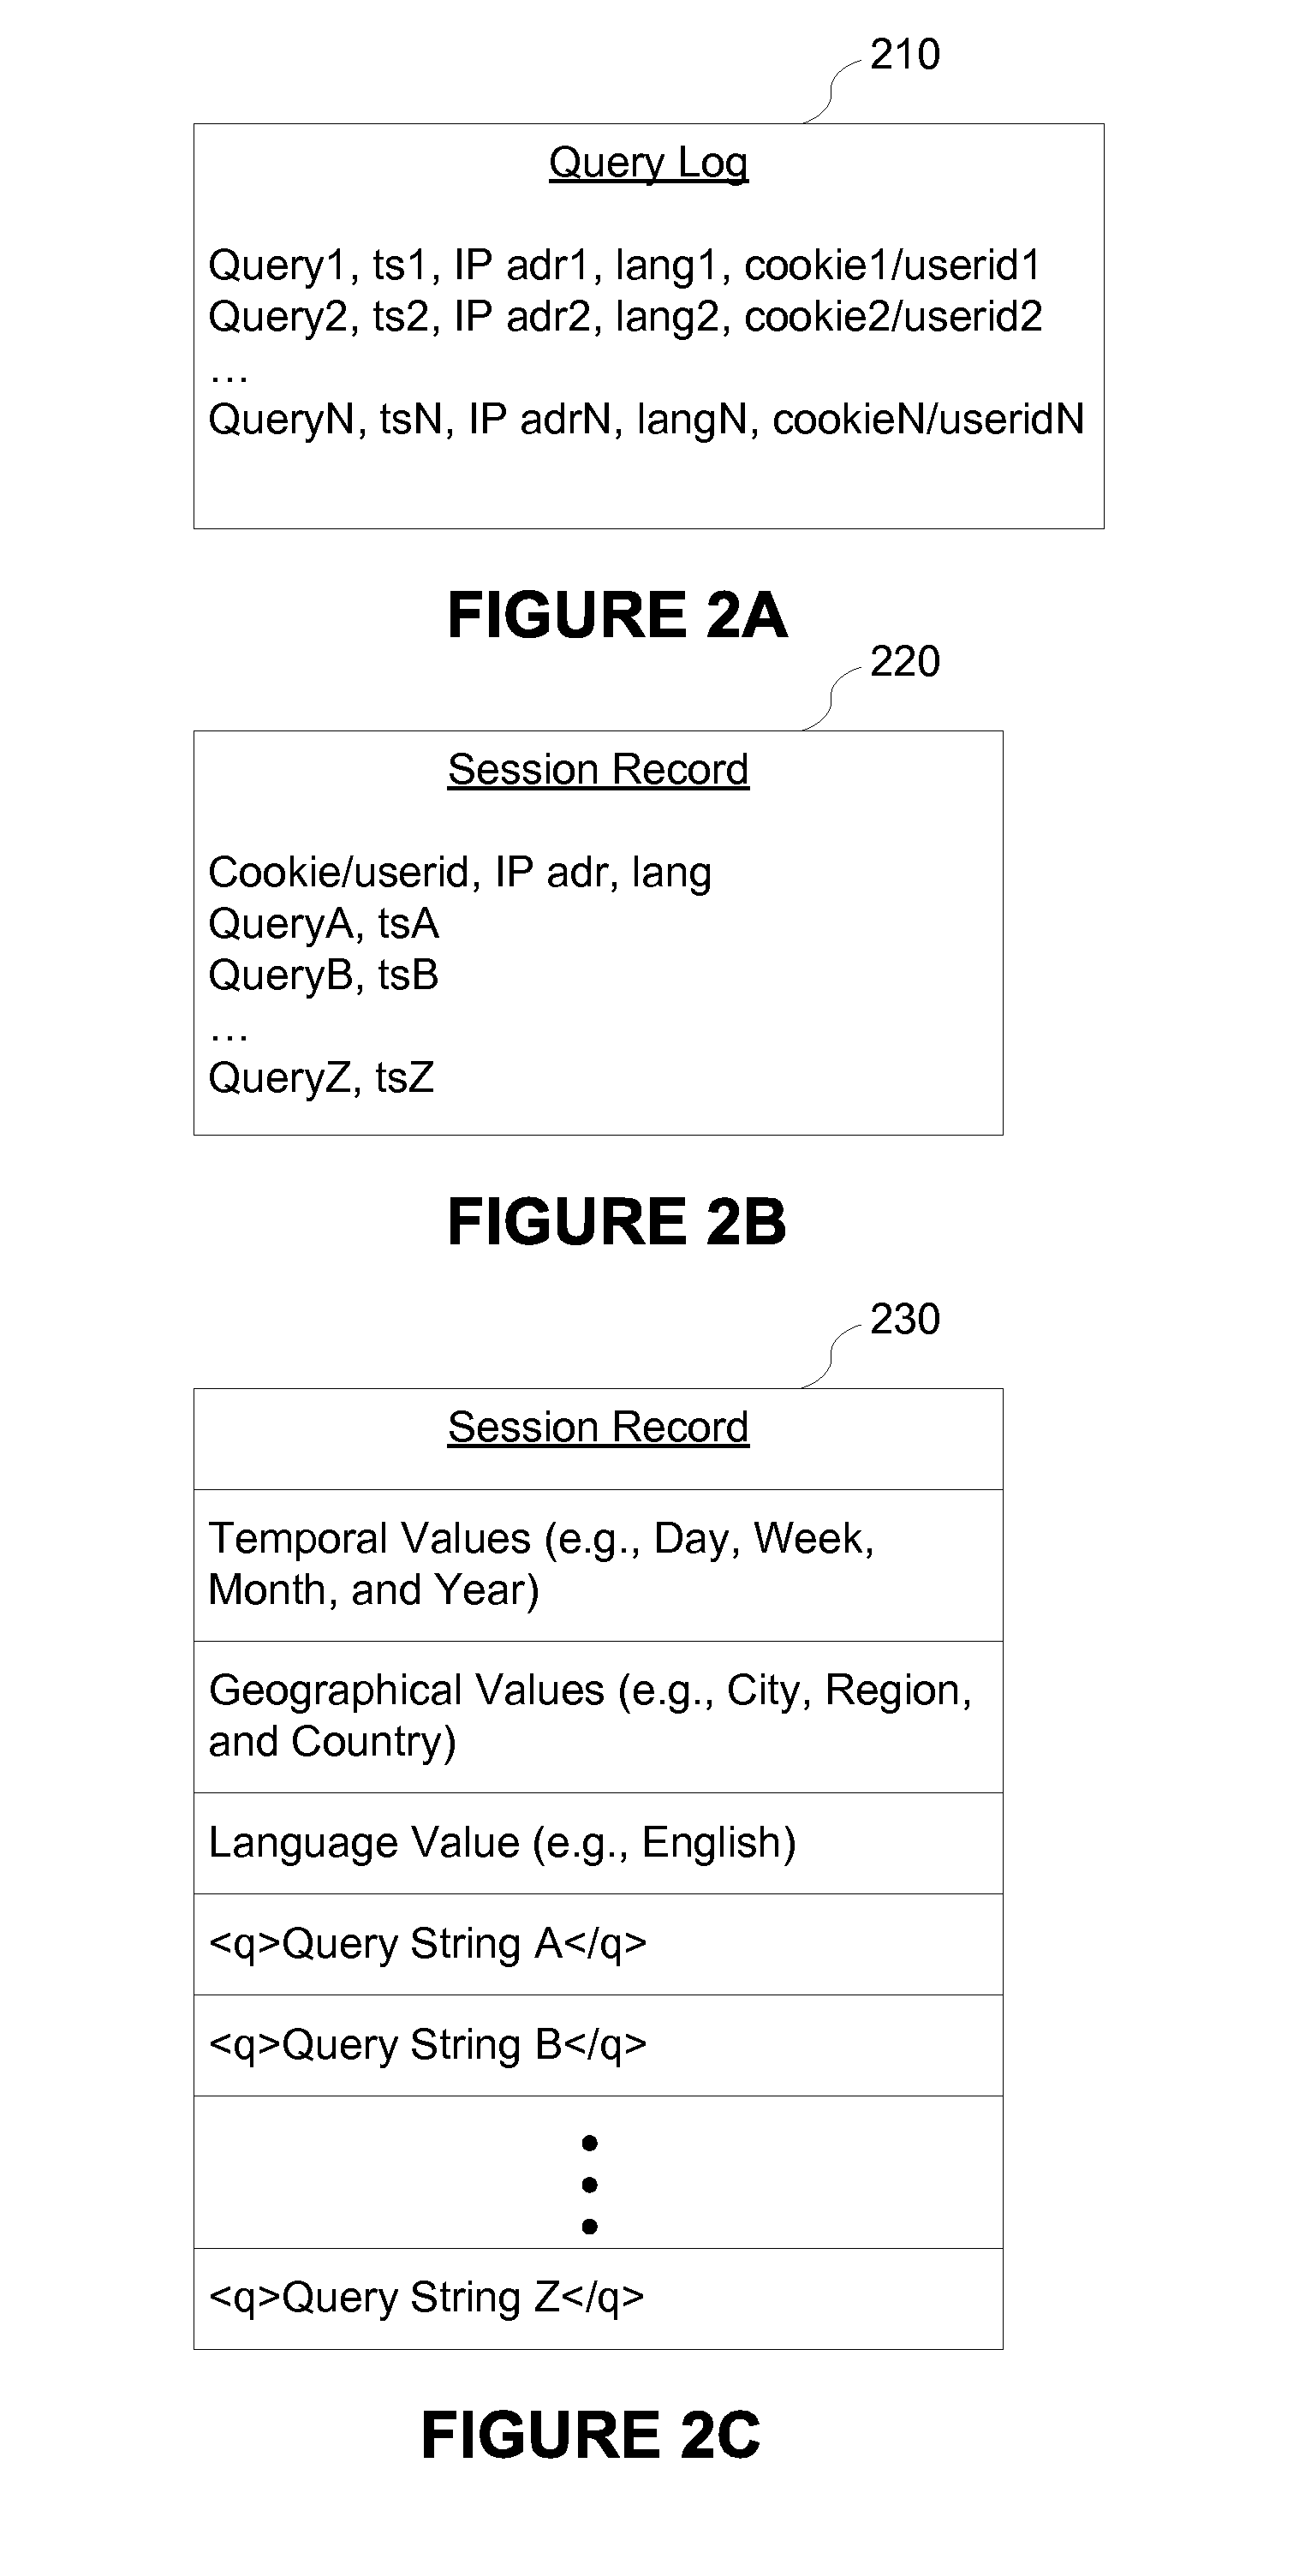 Systems and methods for generating statistics from search engine query logs